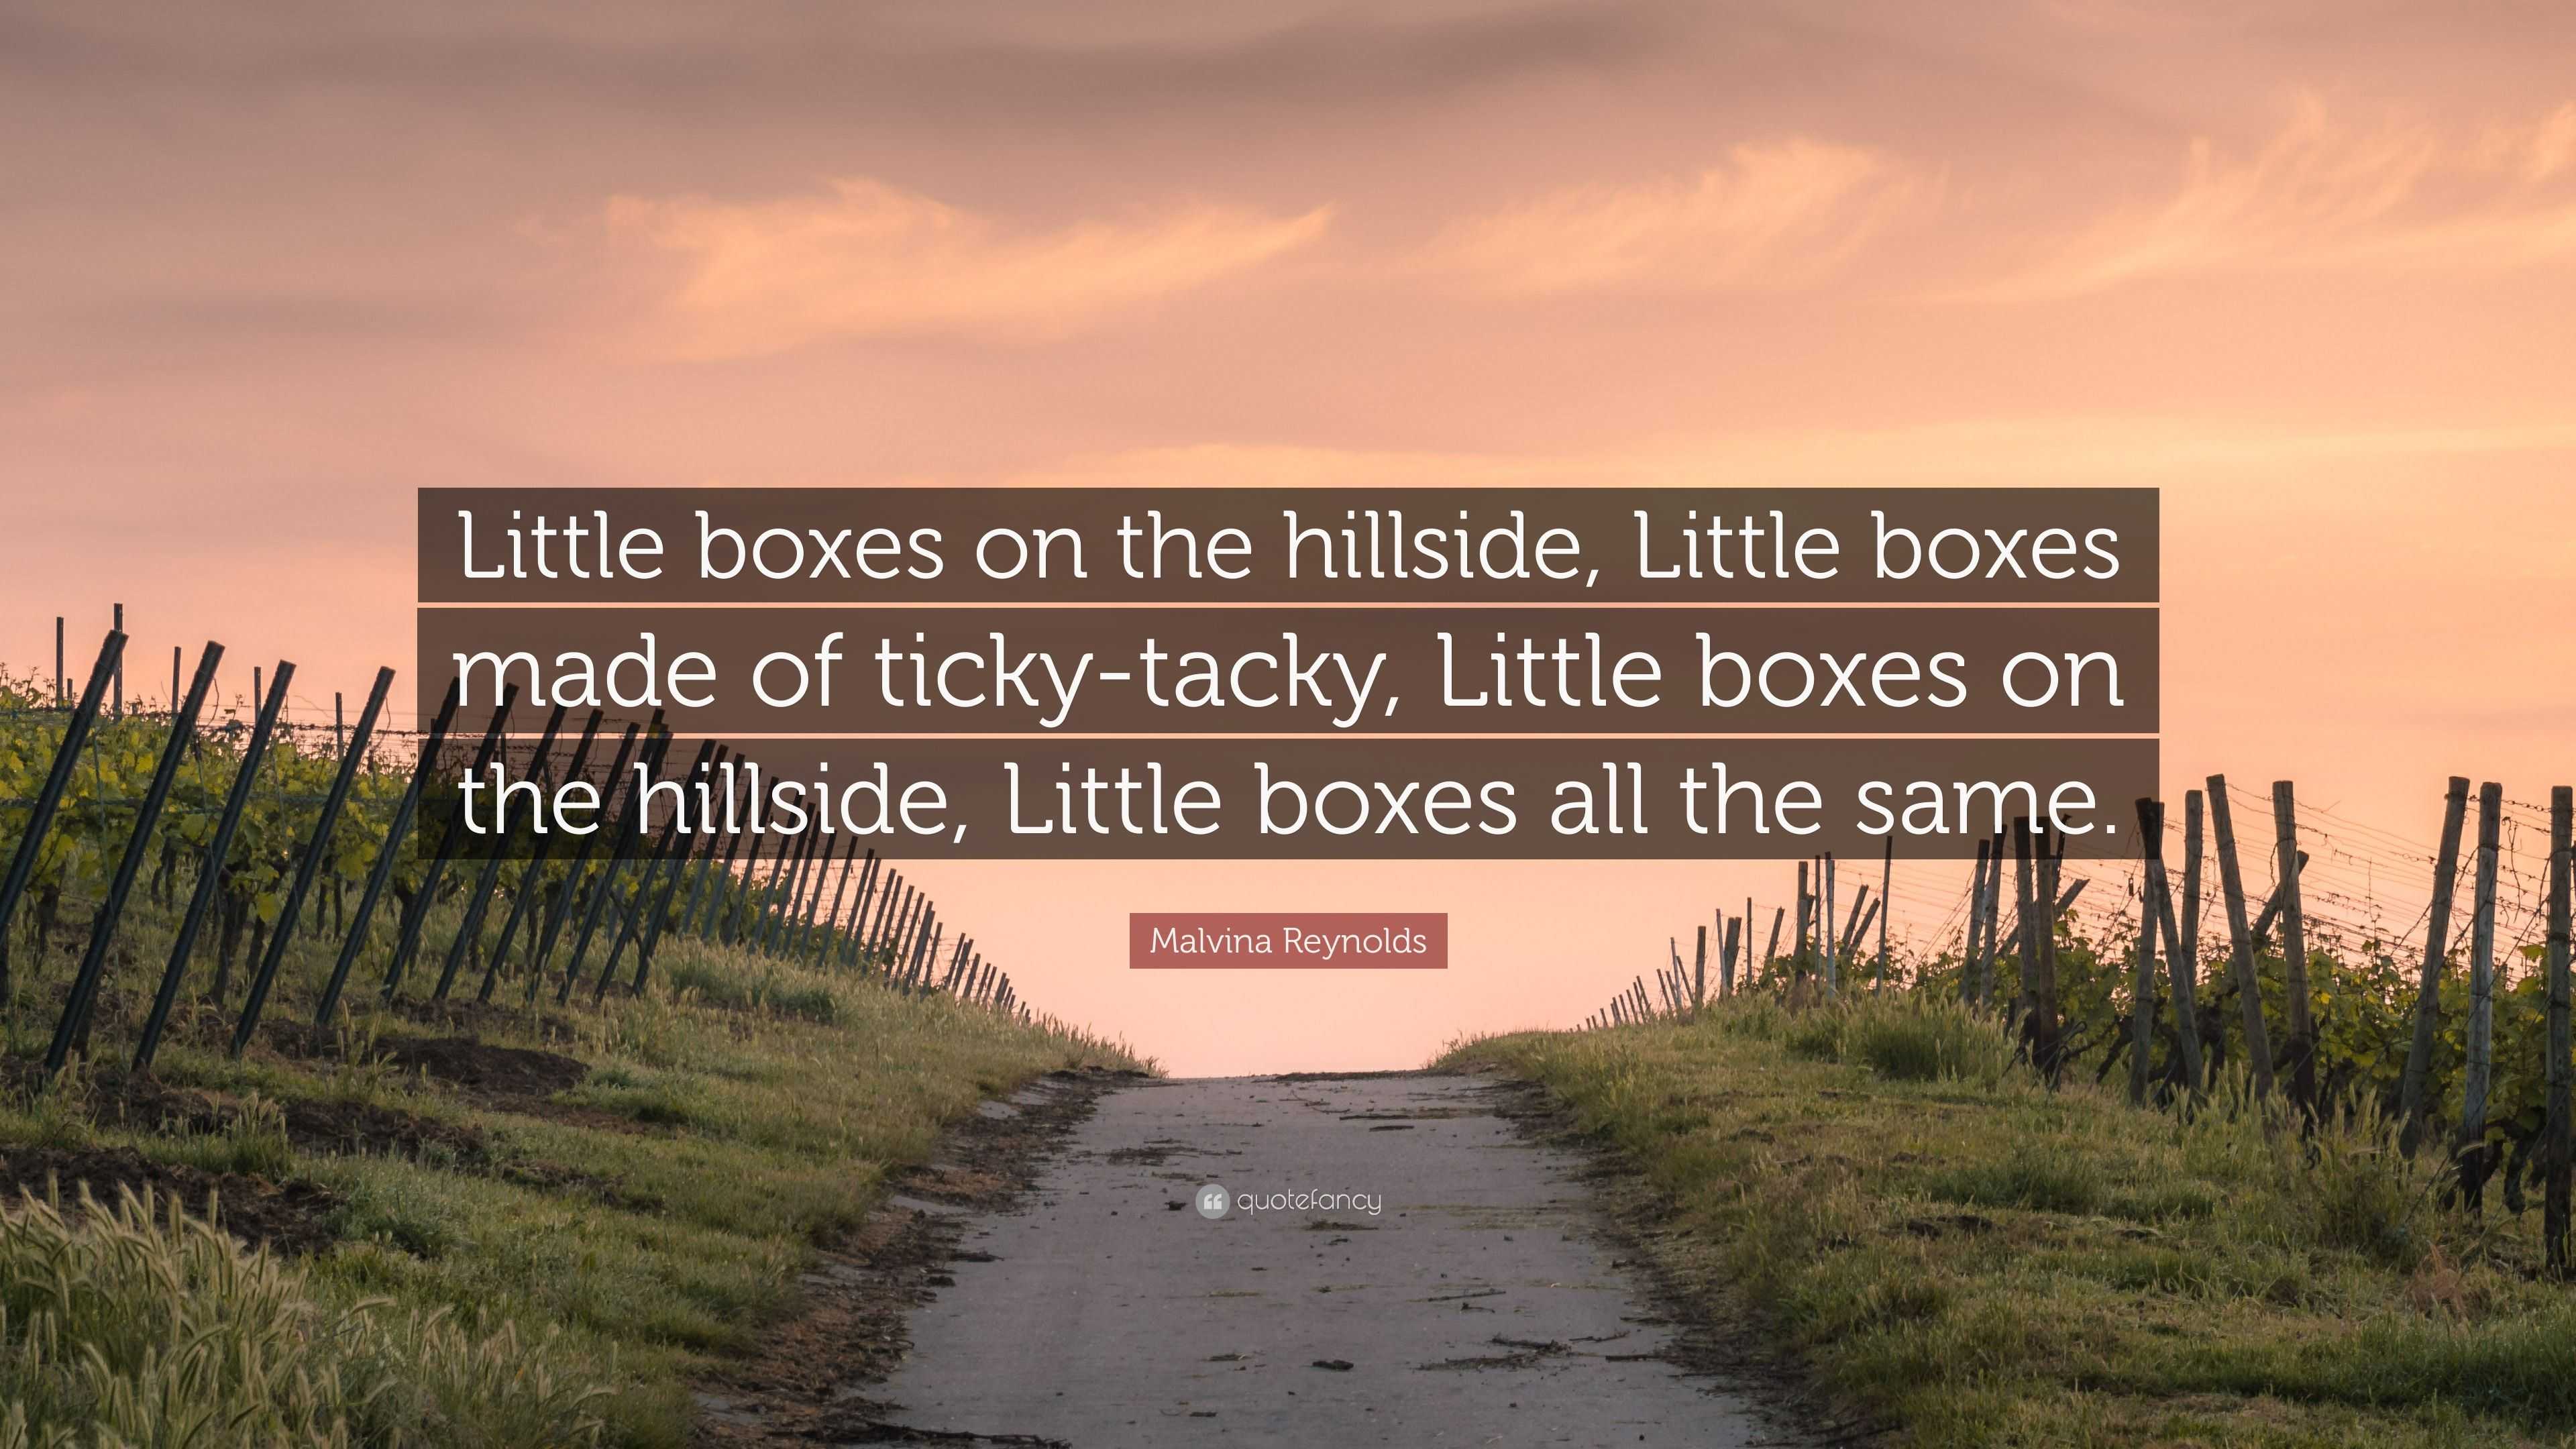 Malvina Reynolds Quote Little Boxes On The Hillside Little Boxes Made Of Ticky Tacky Little Boxes On The Hillside Little Boxes All The Same 7 Wallpapers Quotefancy